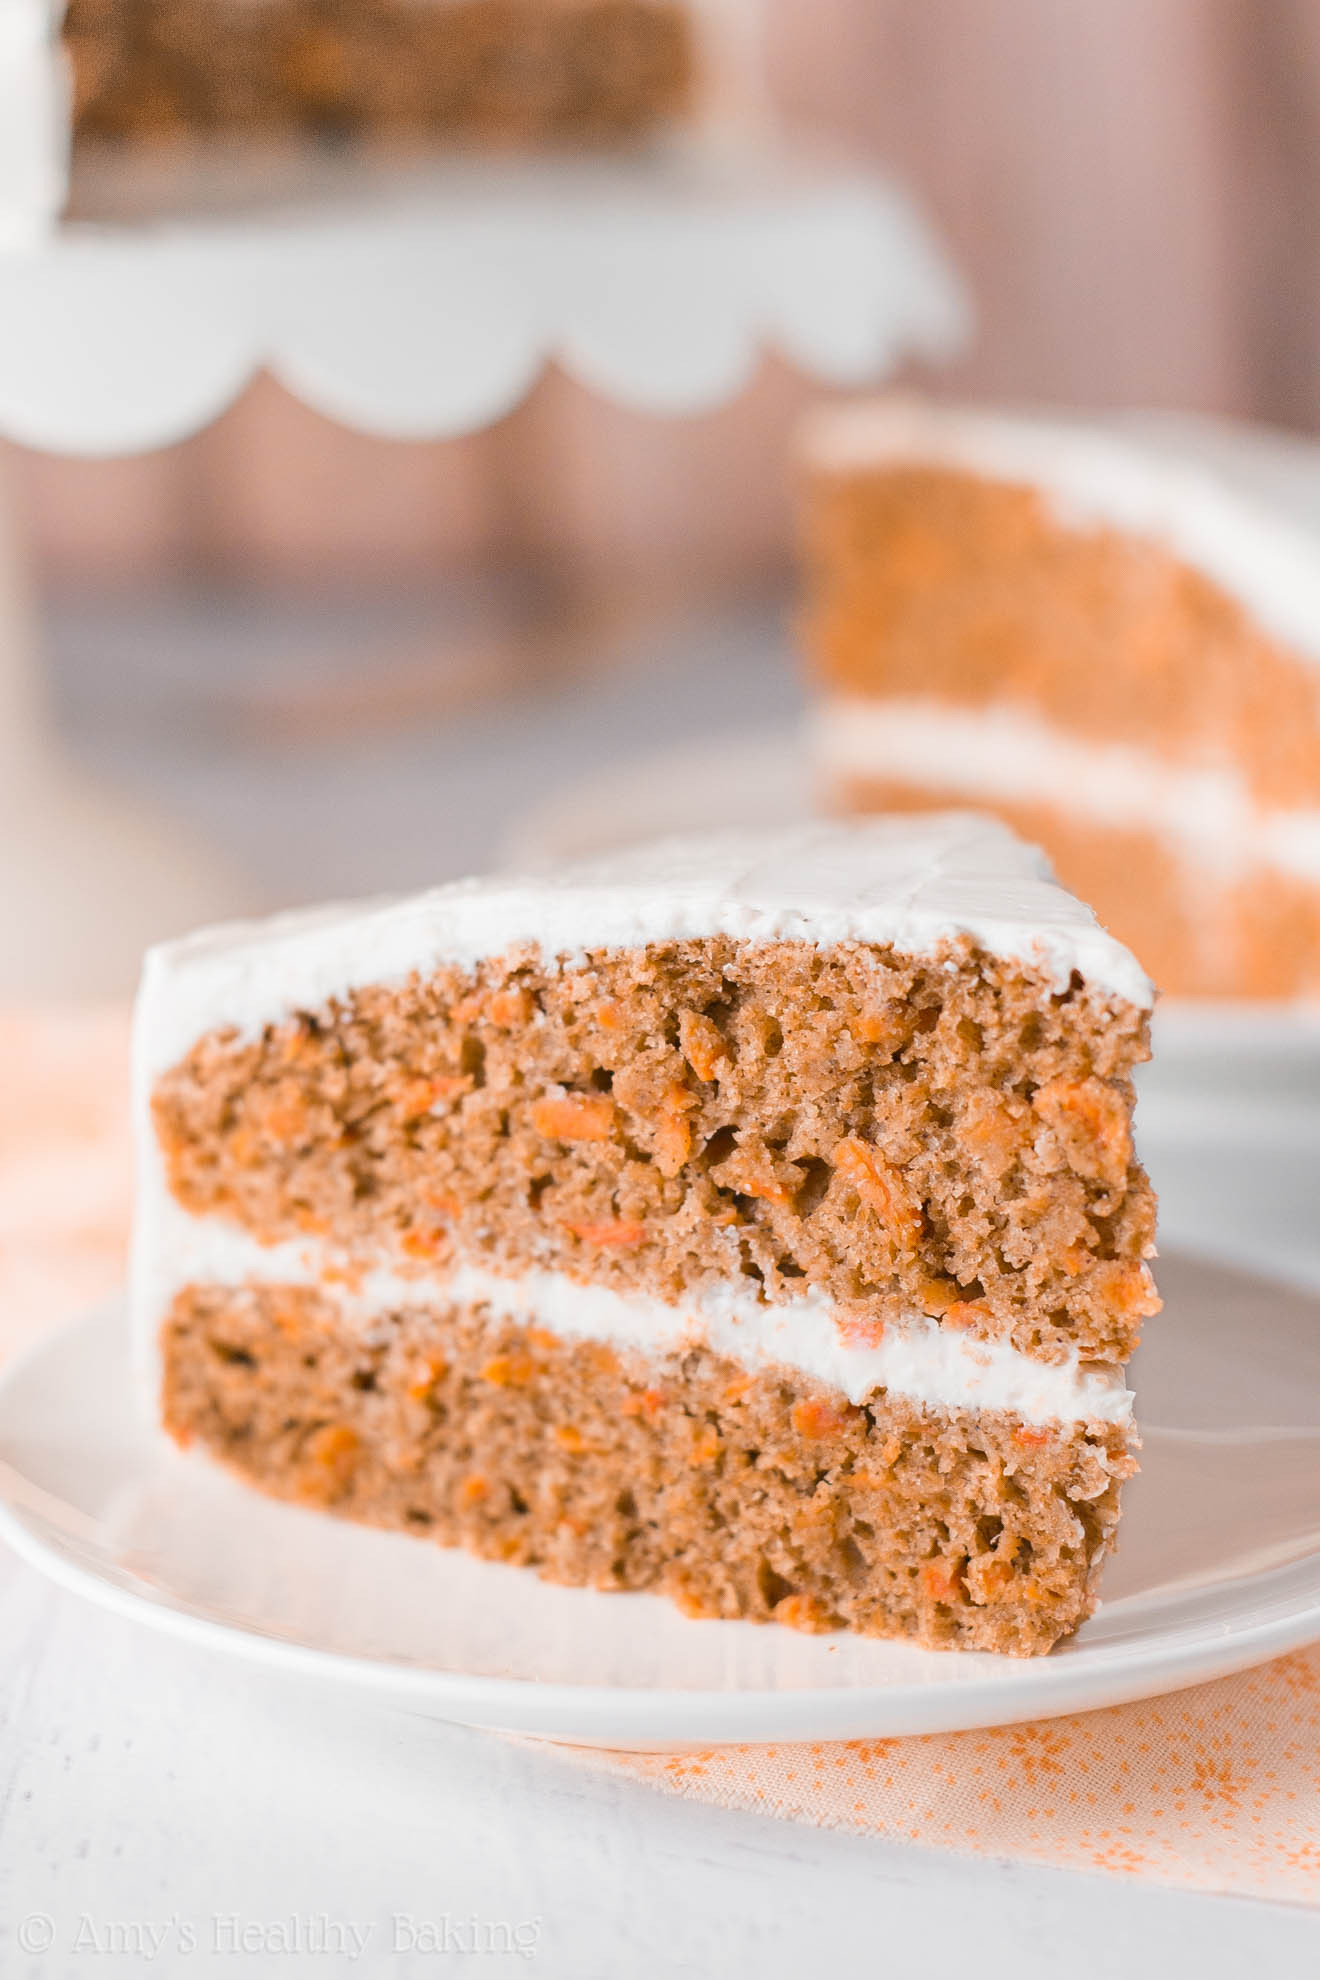 Healthy Carrot Cake Recipe
 The Ultimate Healthy Carrot Cake